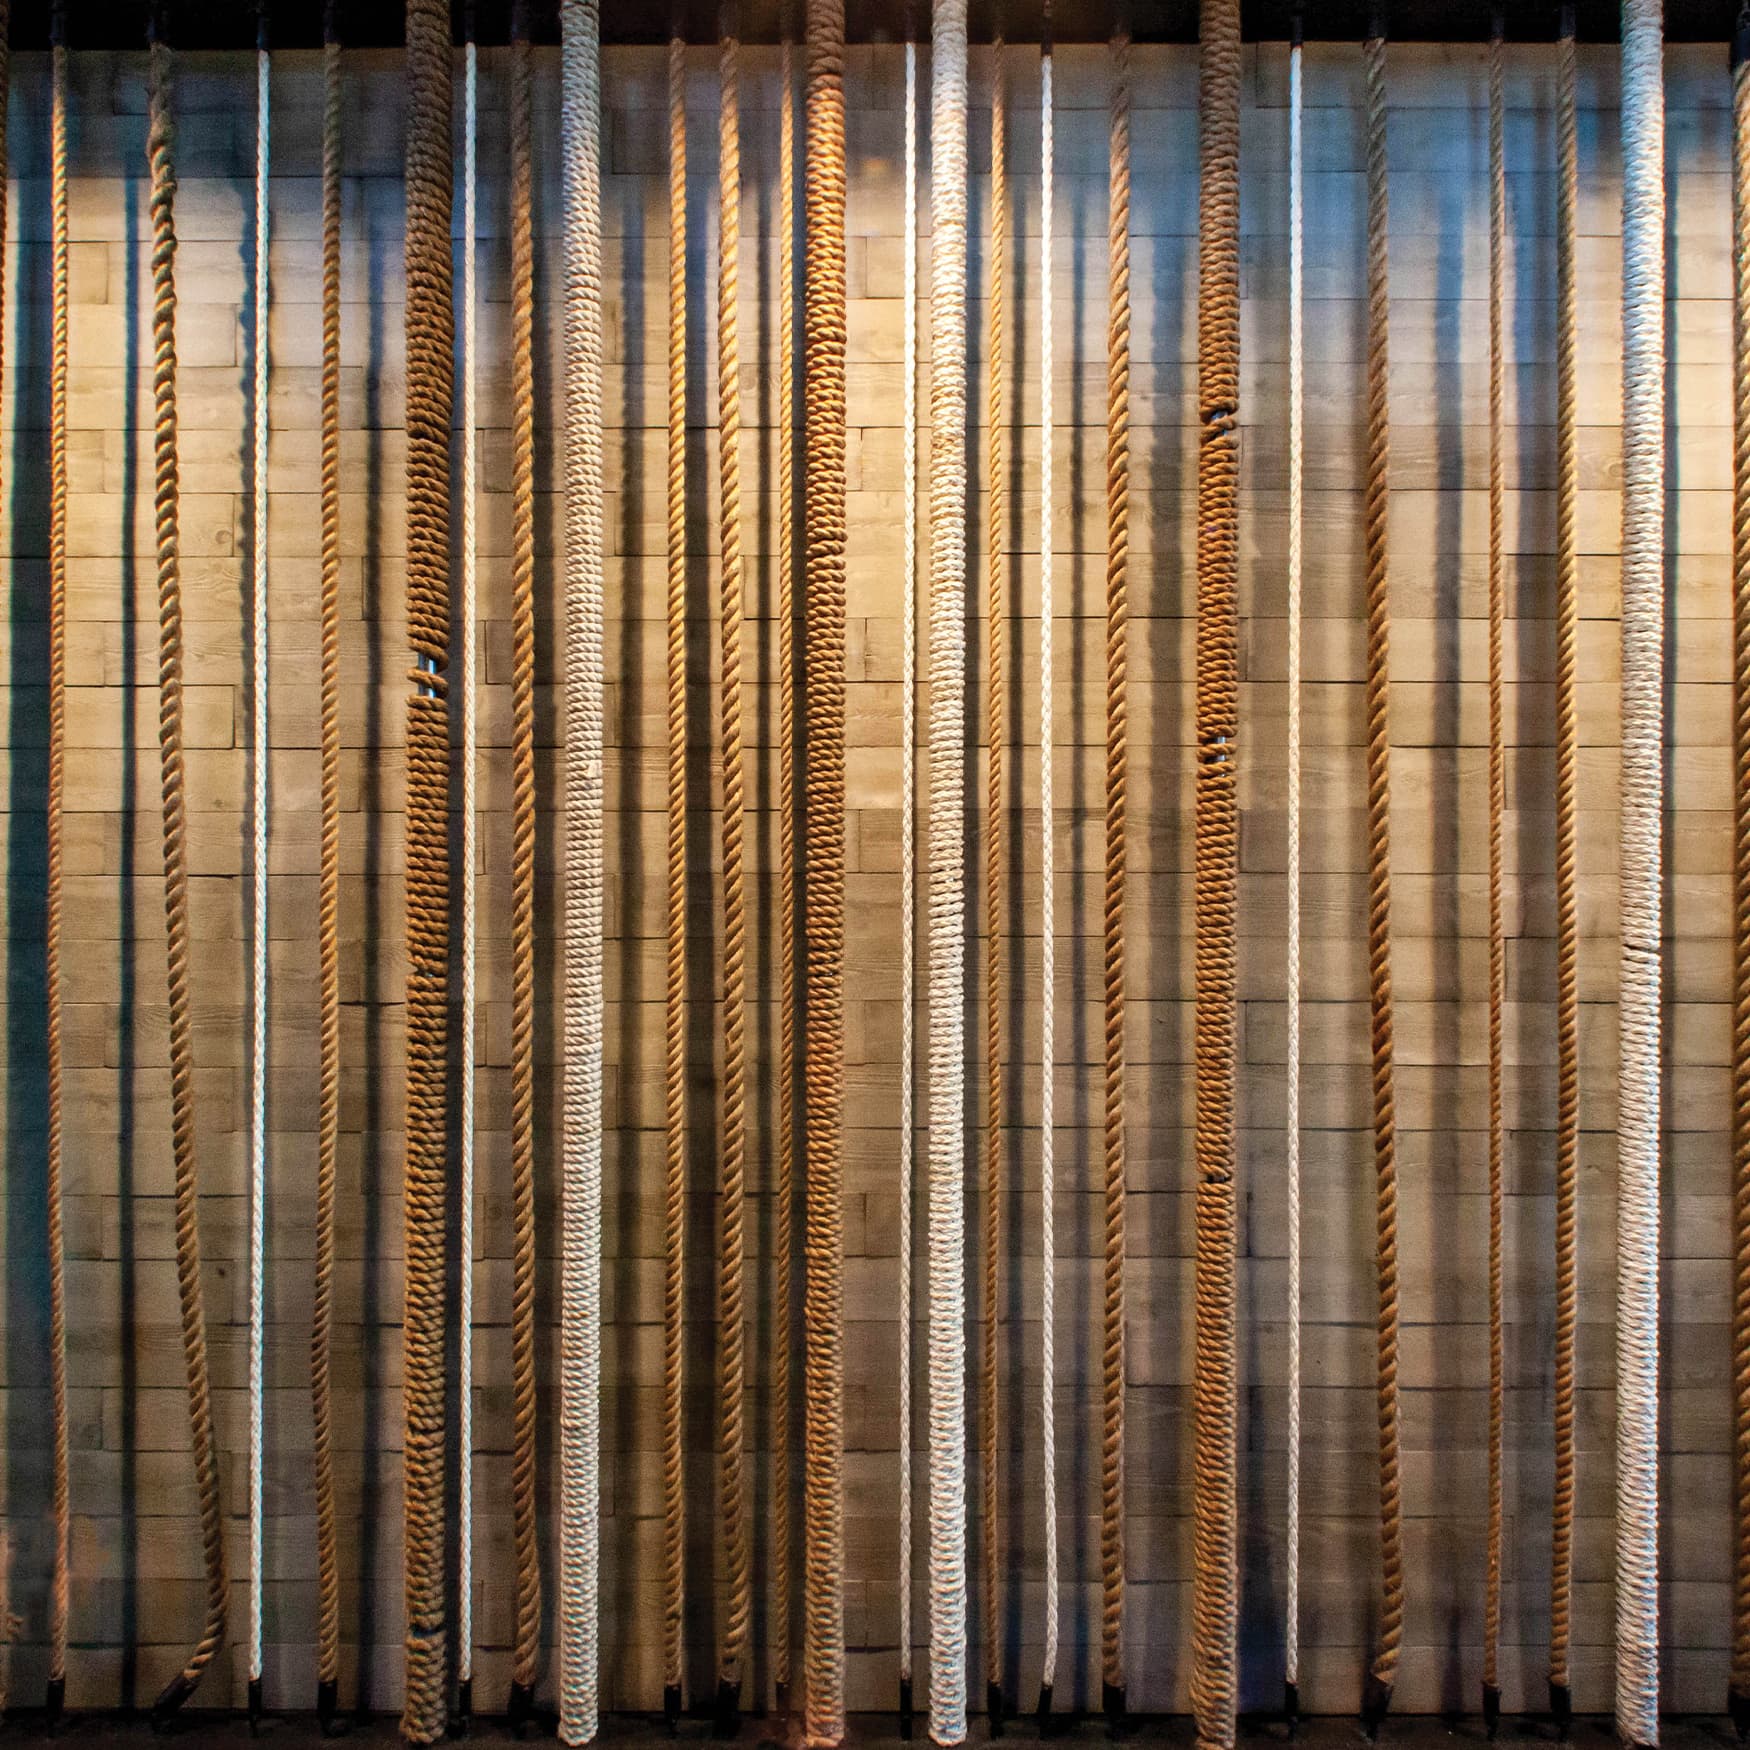 Rope decorative wall for The Skydeck, a retail food and beverage hall, located in Del Mar, California.